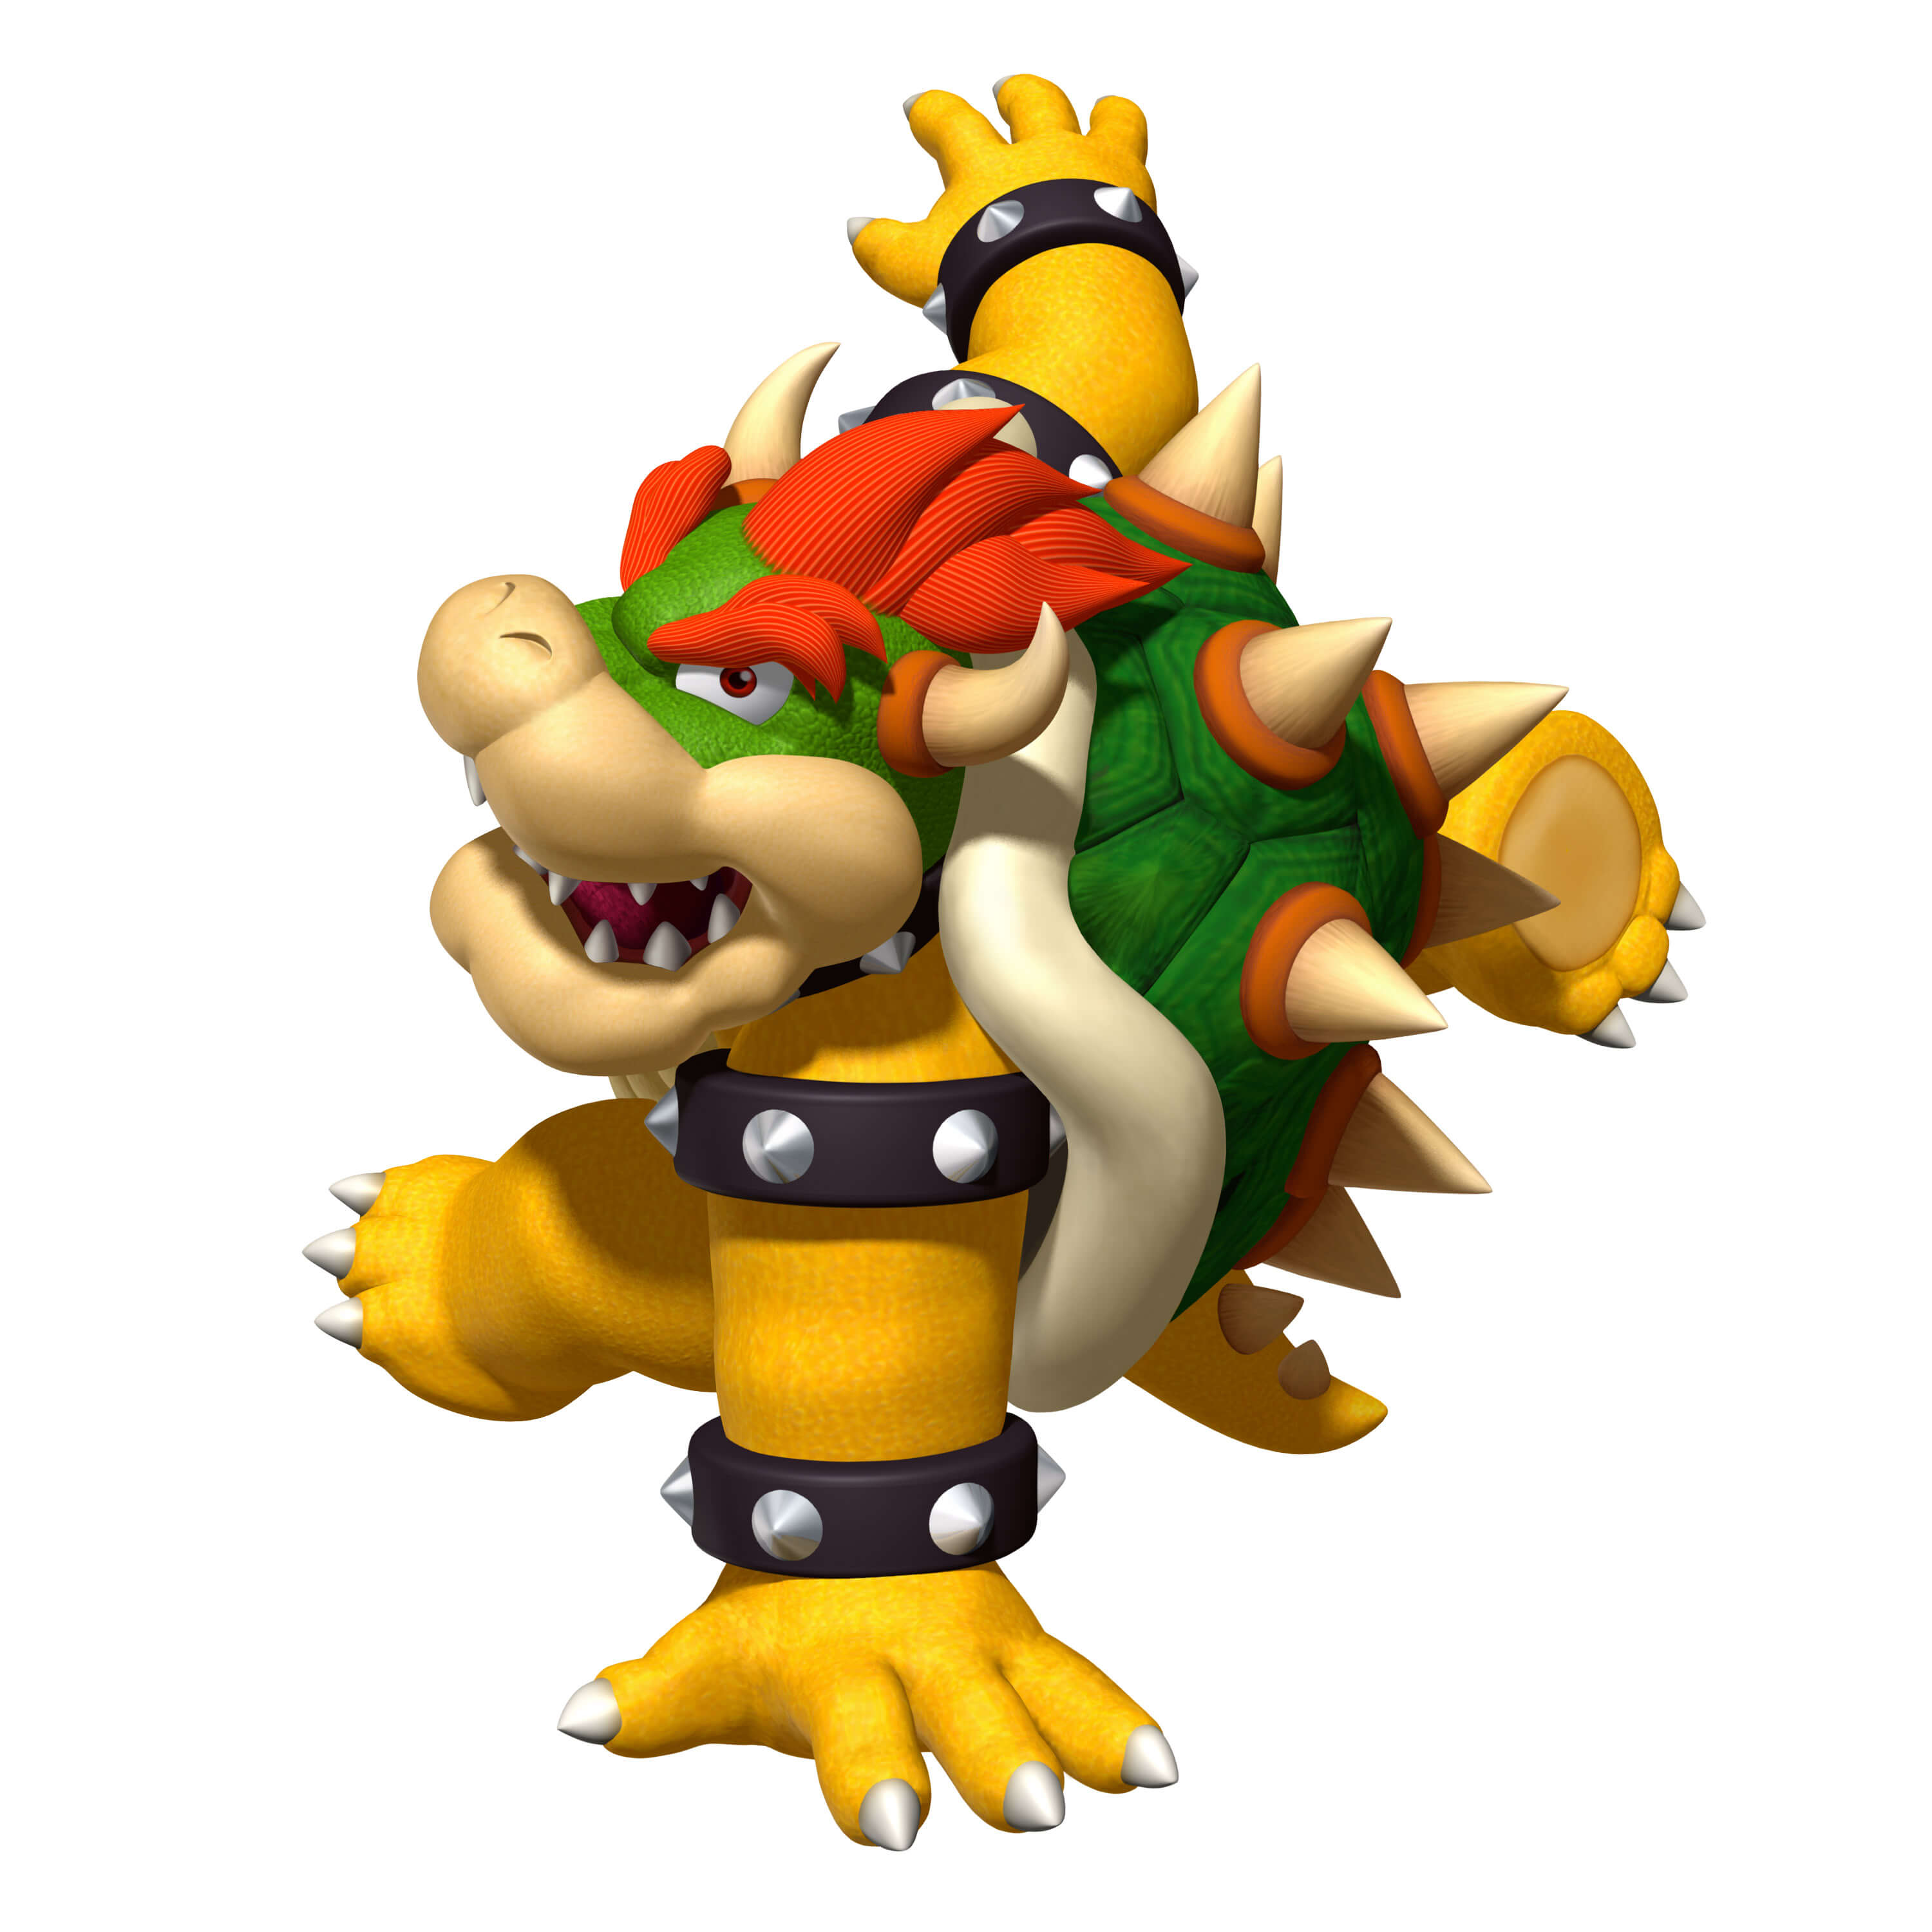 How tall is Bowser ?